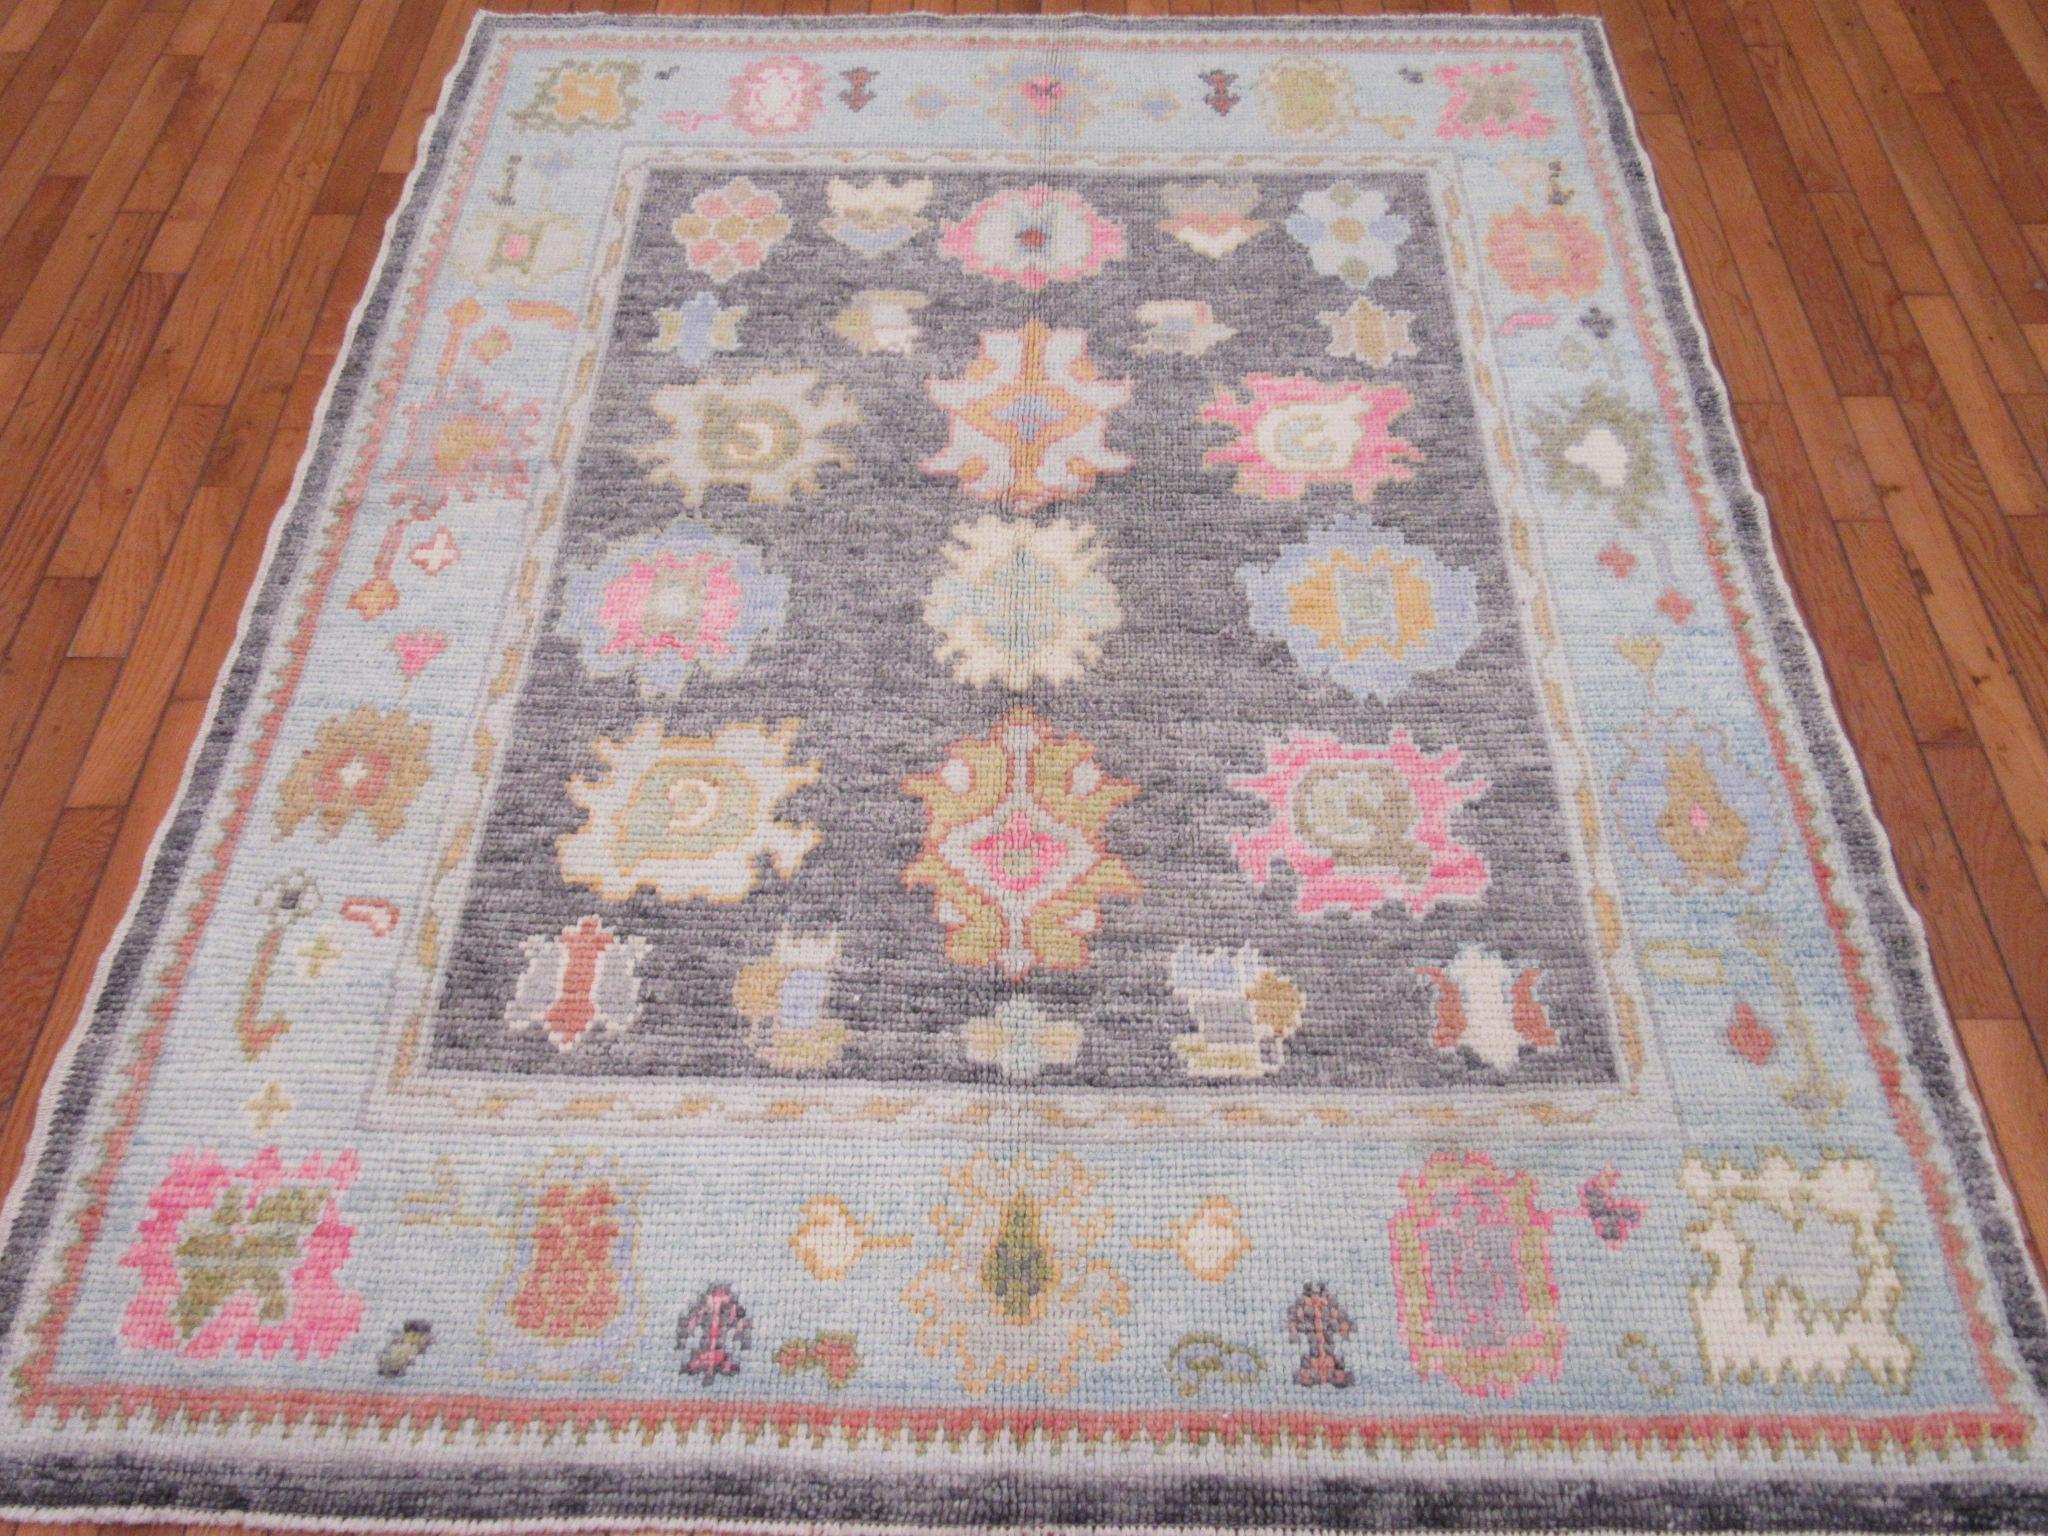 This is a new hand knotted Oushak rug from Turkey. It is made with fine Turkish wool colored with natural dyes. It measures 5' x 6' 3'' which can be used in just about anywhere in your home bringing color and life to the spot.